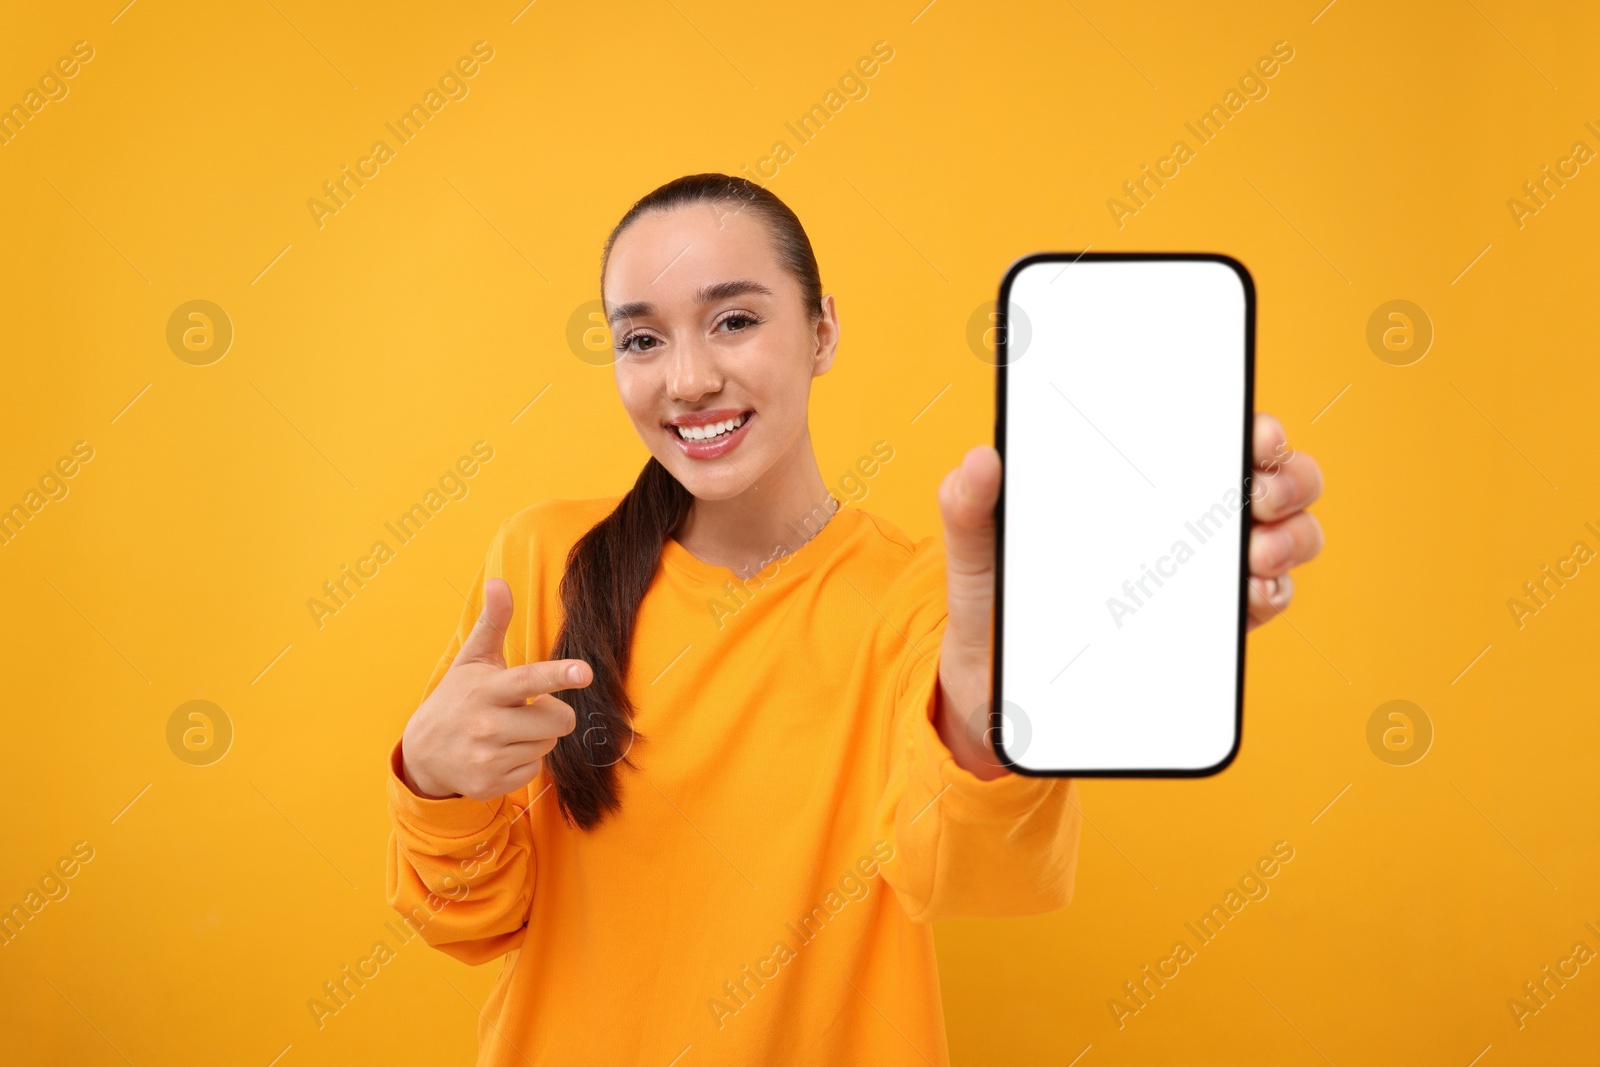 Photo of Young woman showing smartphone in hand and pointing at it on yellow background